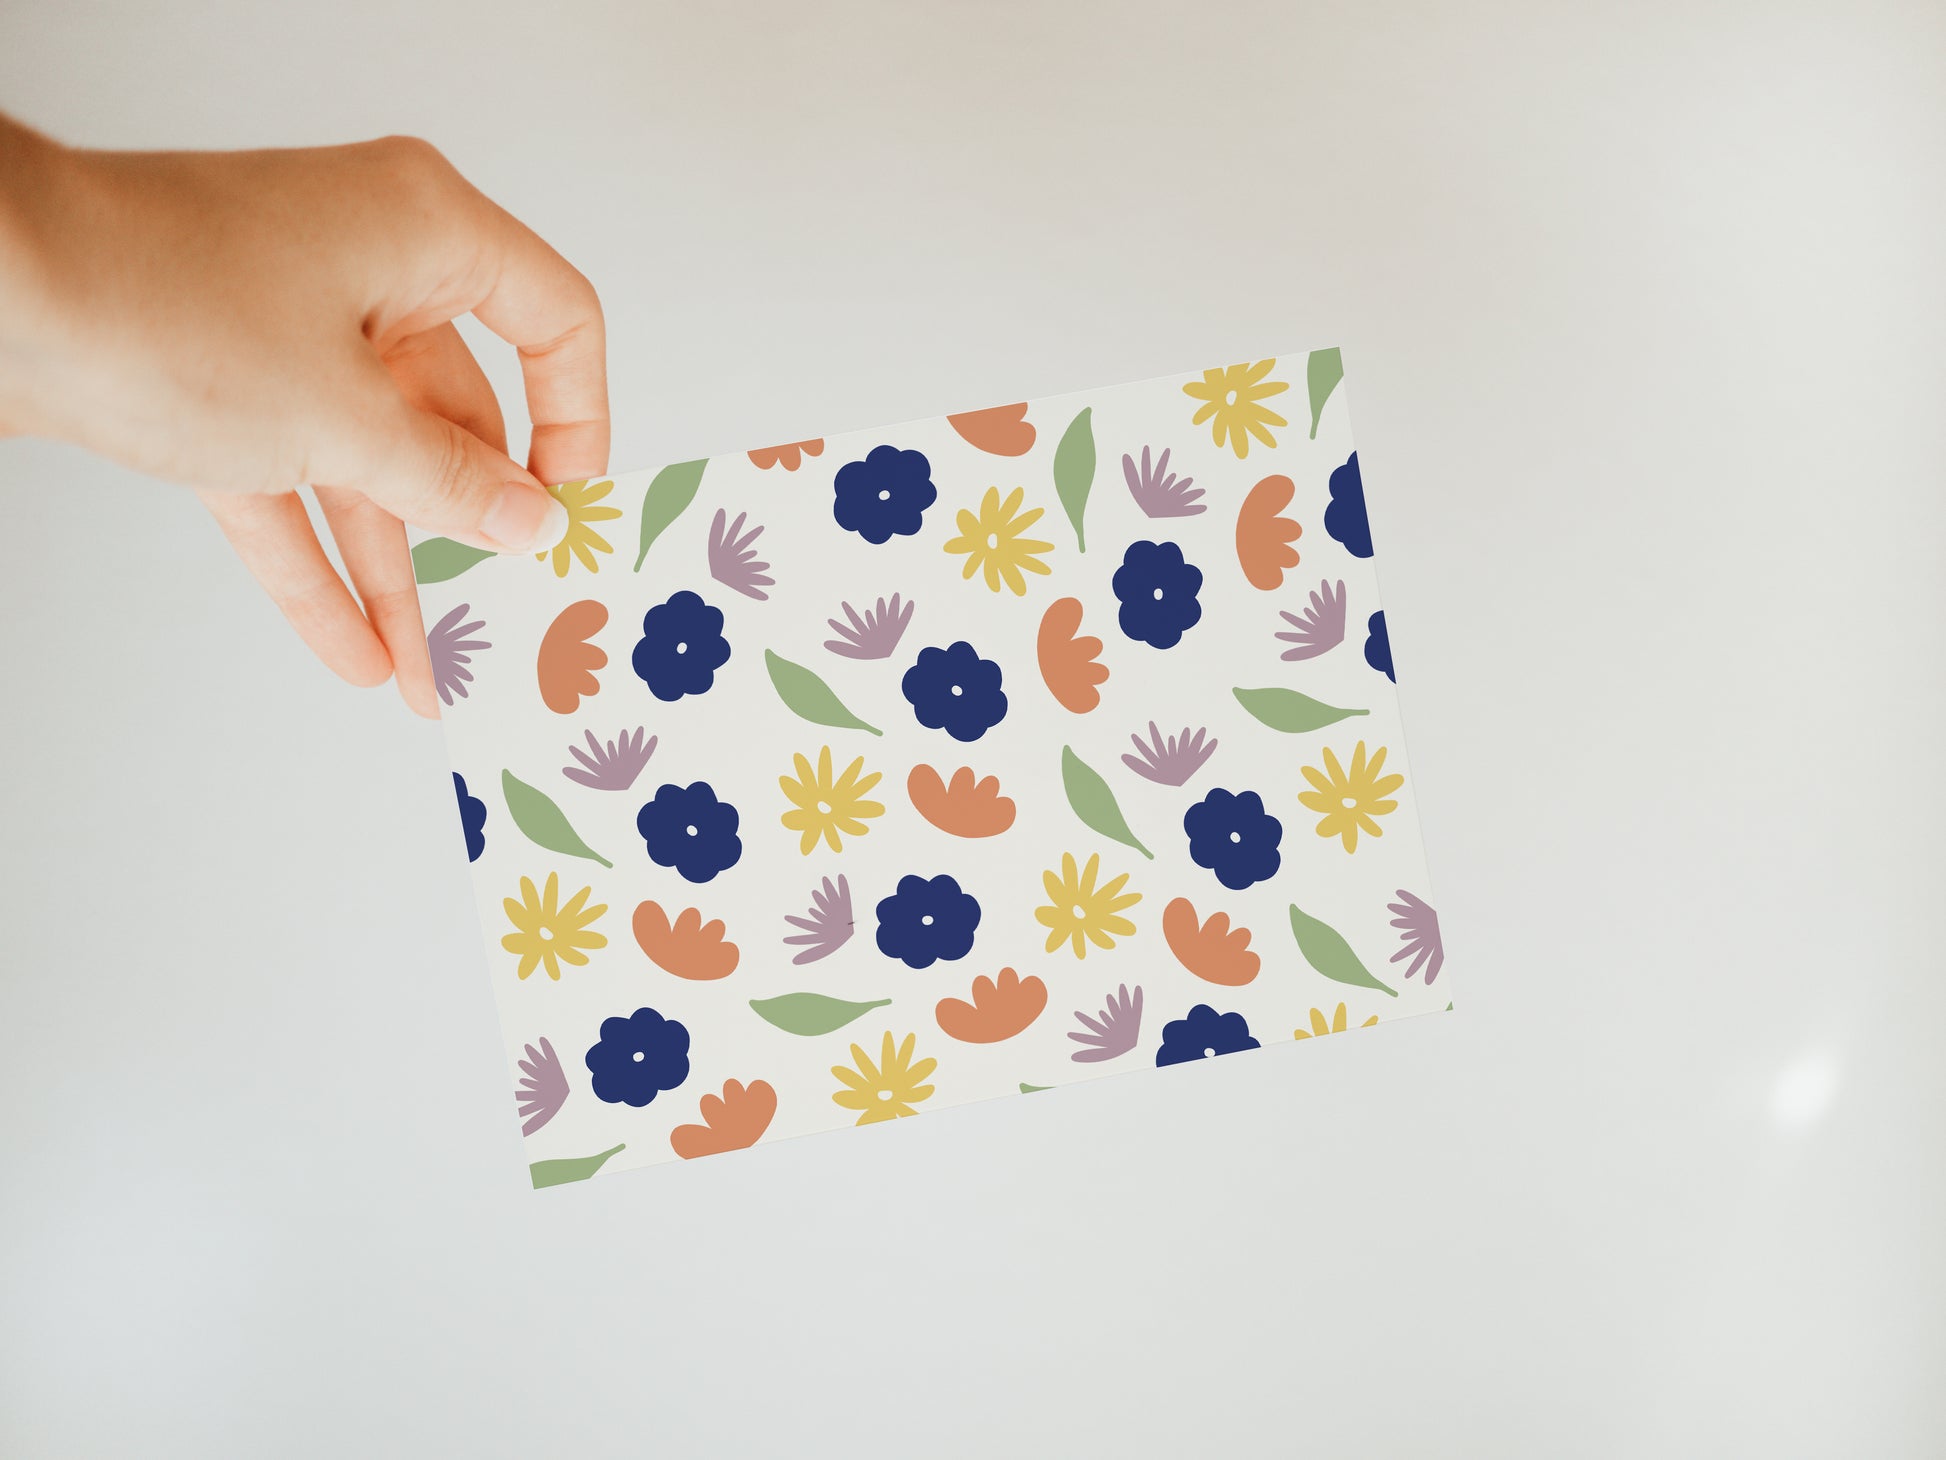 hand holding an off-white greeting card with a colorful floral and leaf pattern in green, dark blue, orange, yellow, and lavender.